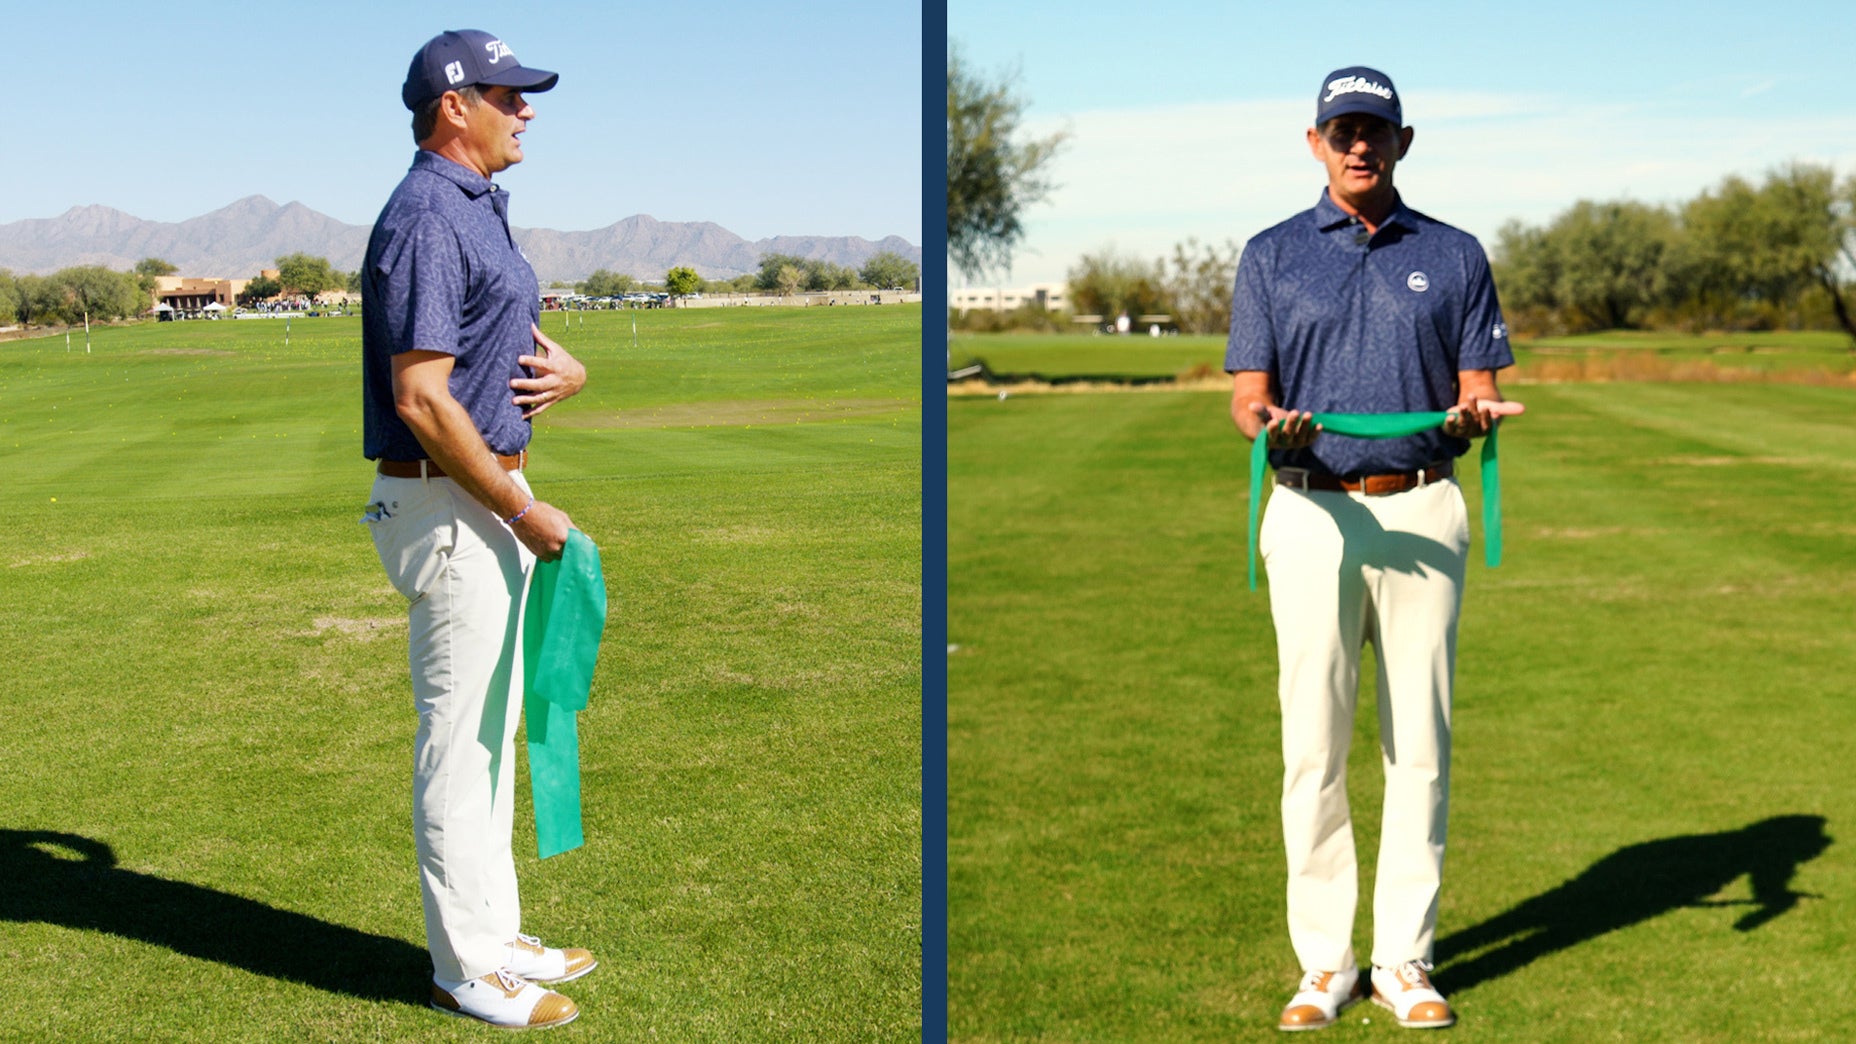 Looking for better golf swing posture? Try this quick exercise from GOLF Top 100 Teacher Jason Baile, which simply uses an elastic band